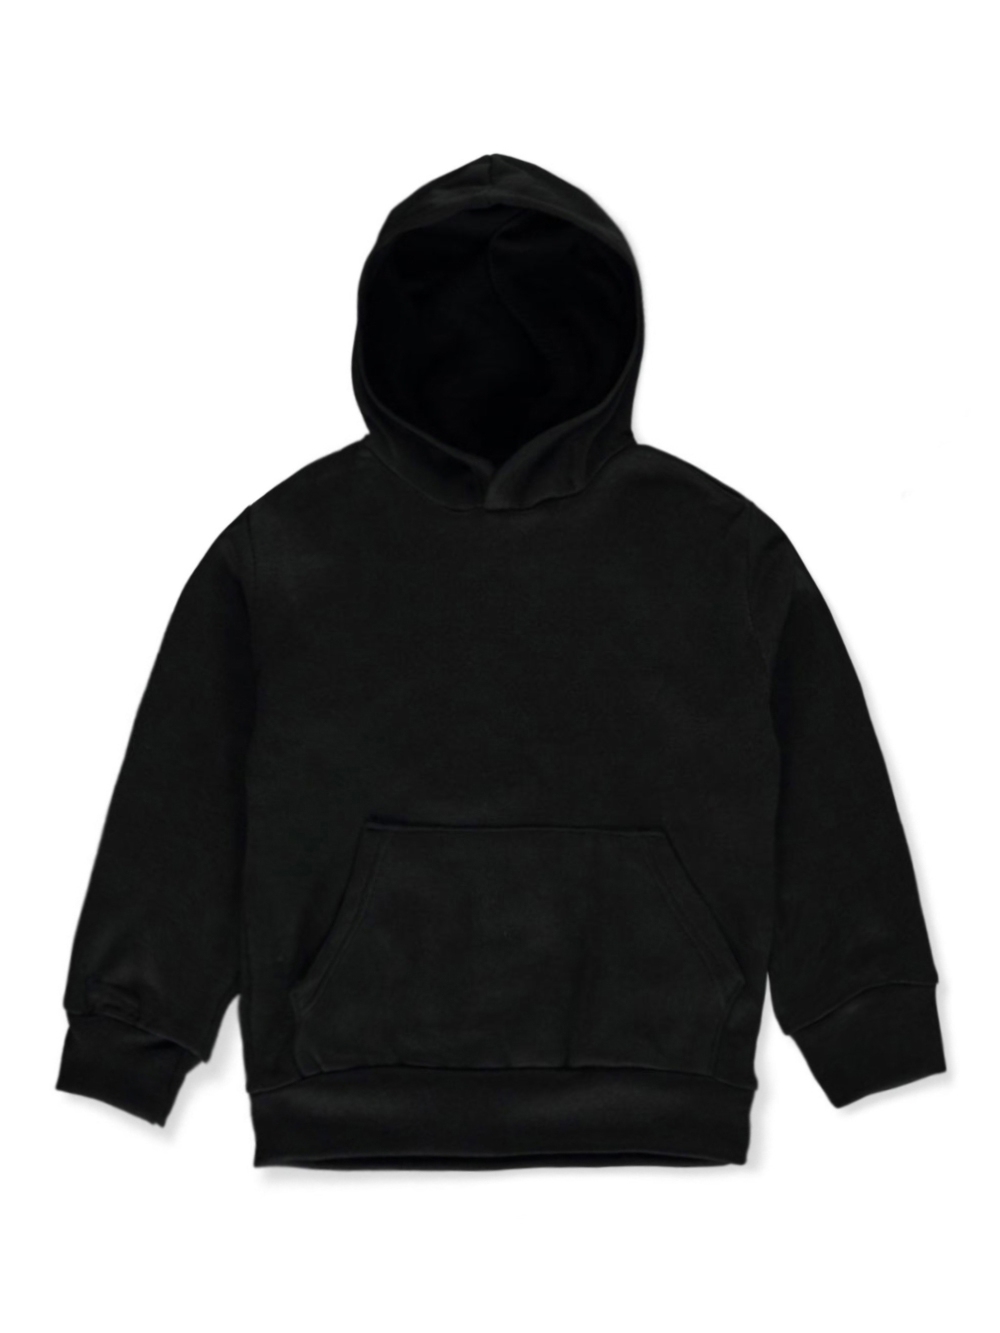 Size 7 Hoodies for Boys